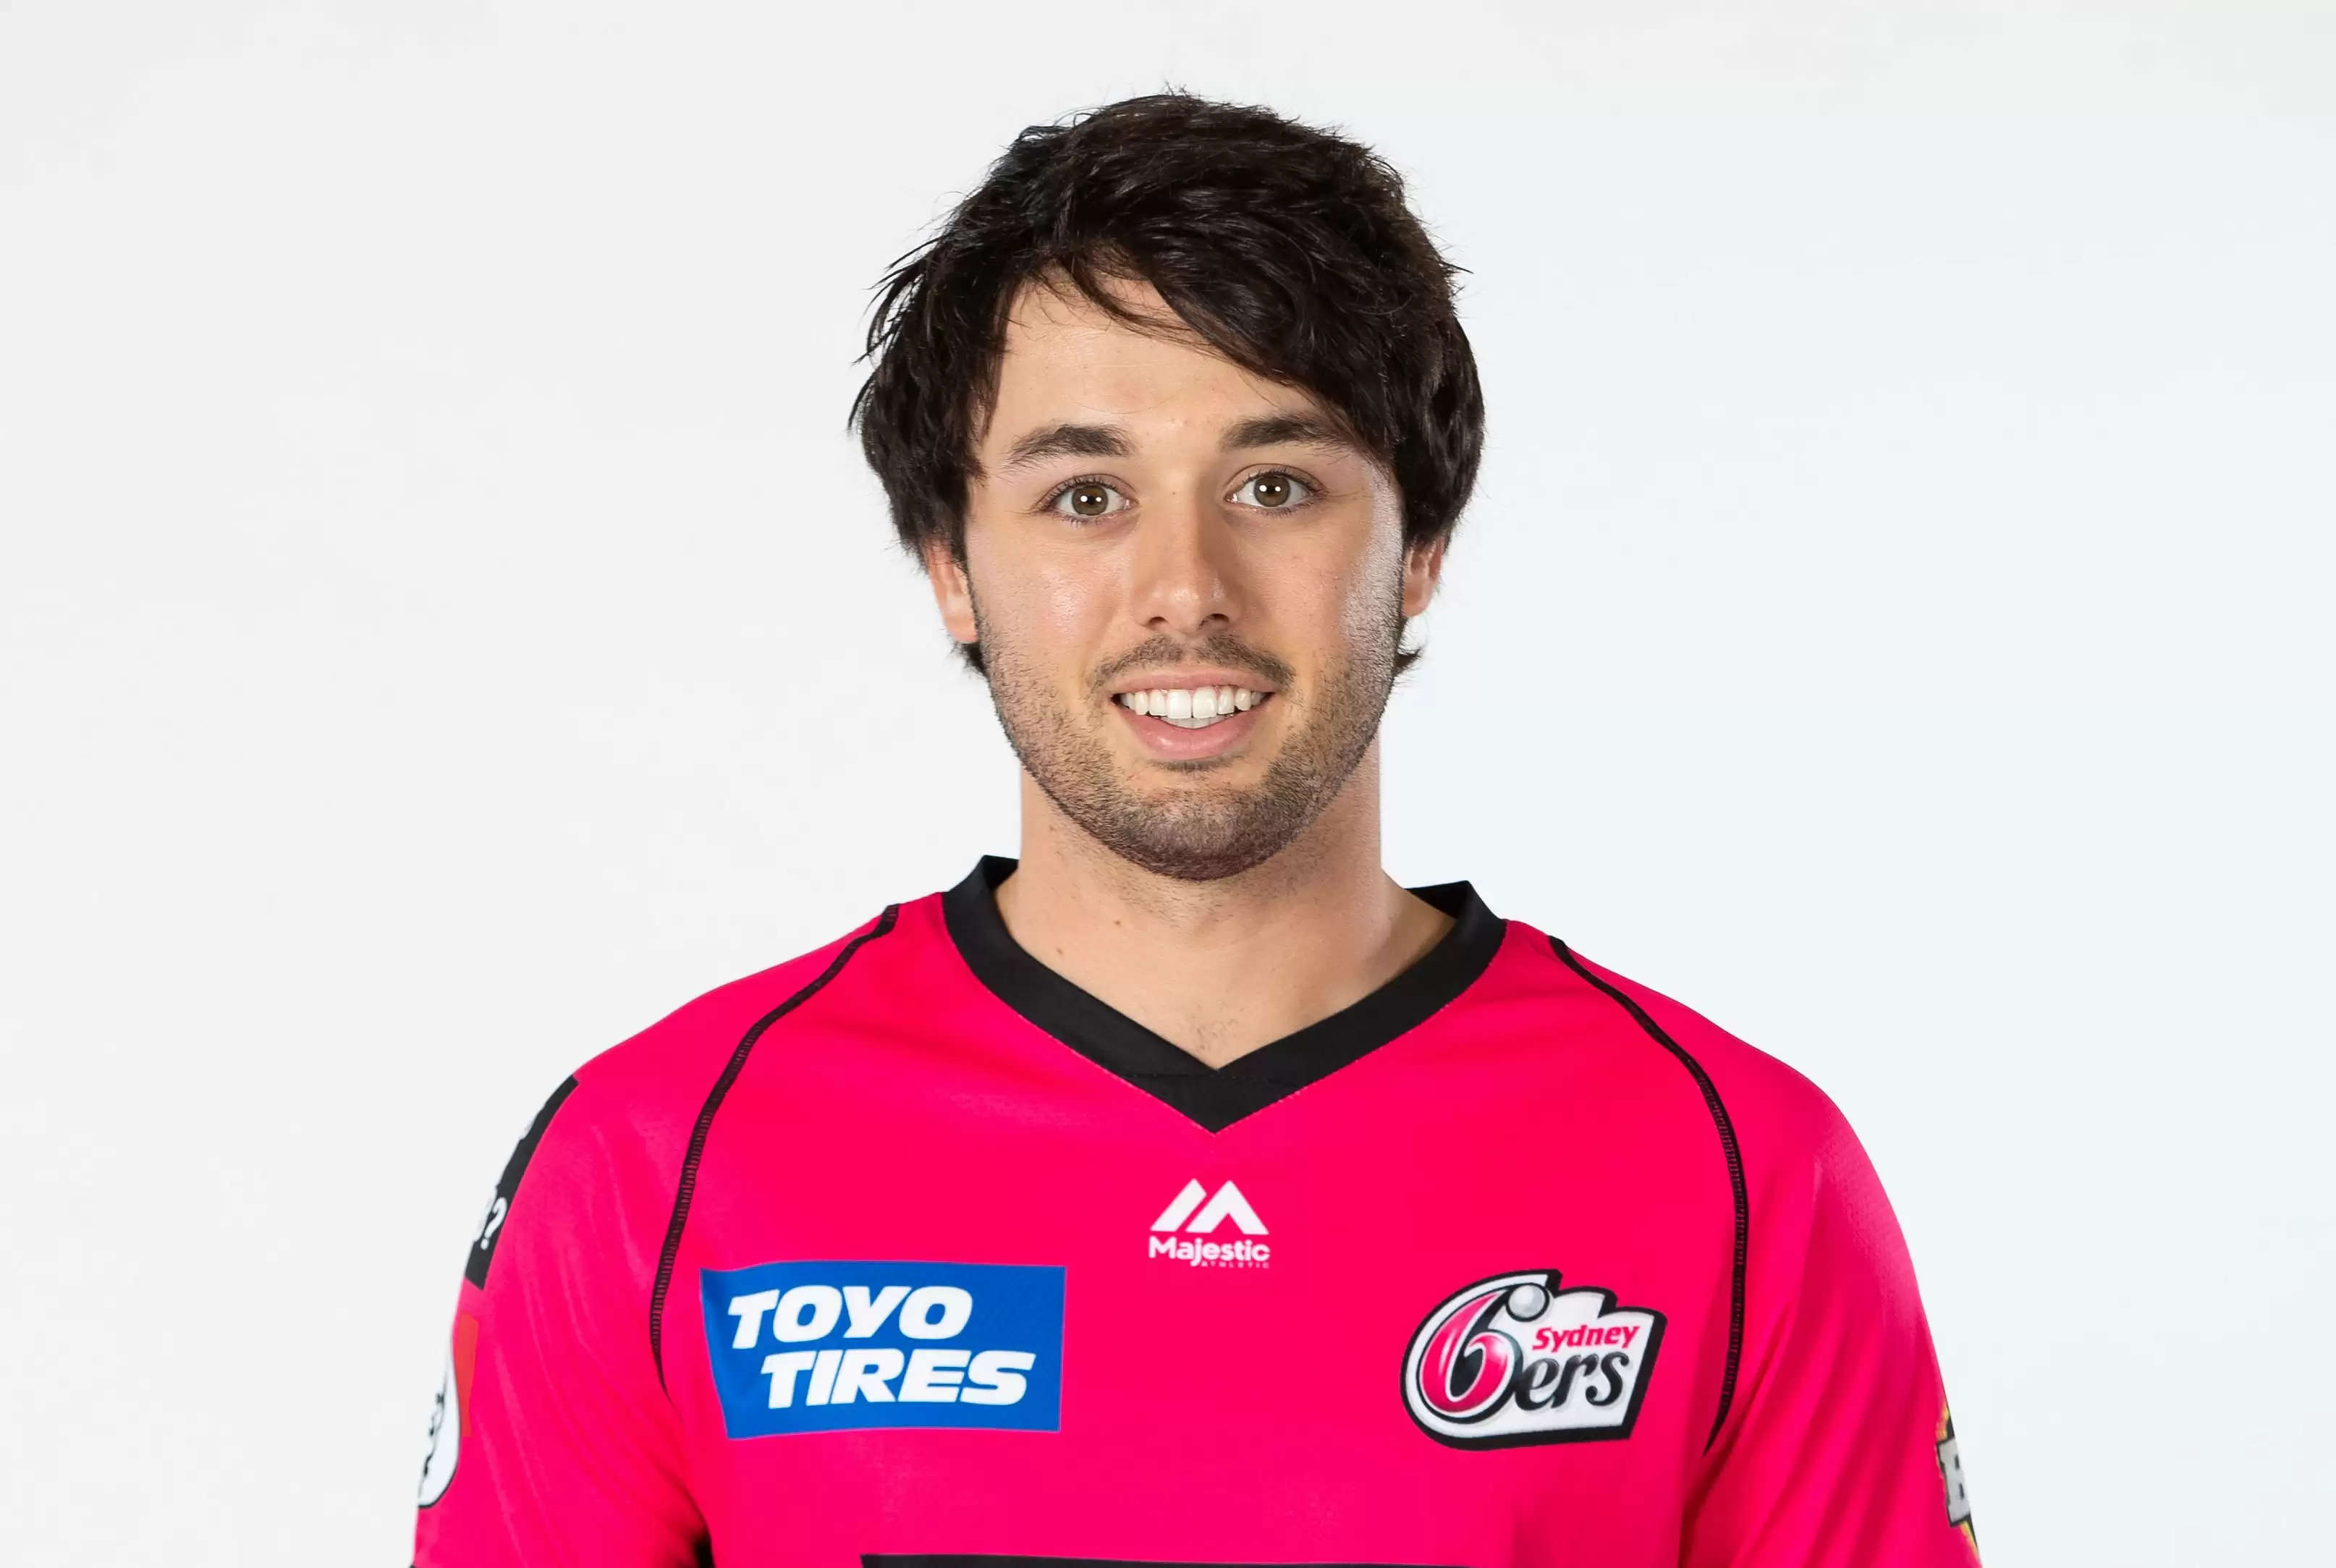 Justin Avendano plays for Sydney Sixers a week after representing Melbourne Stars in BBL 2021-22